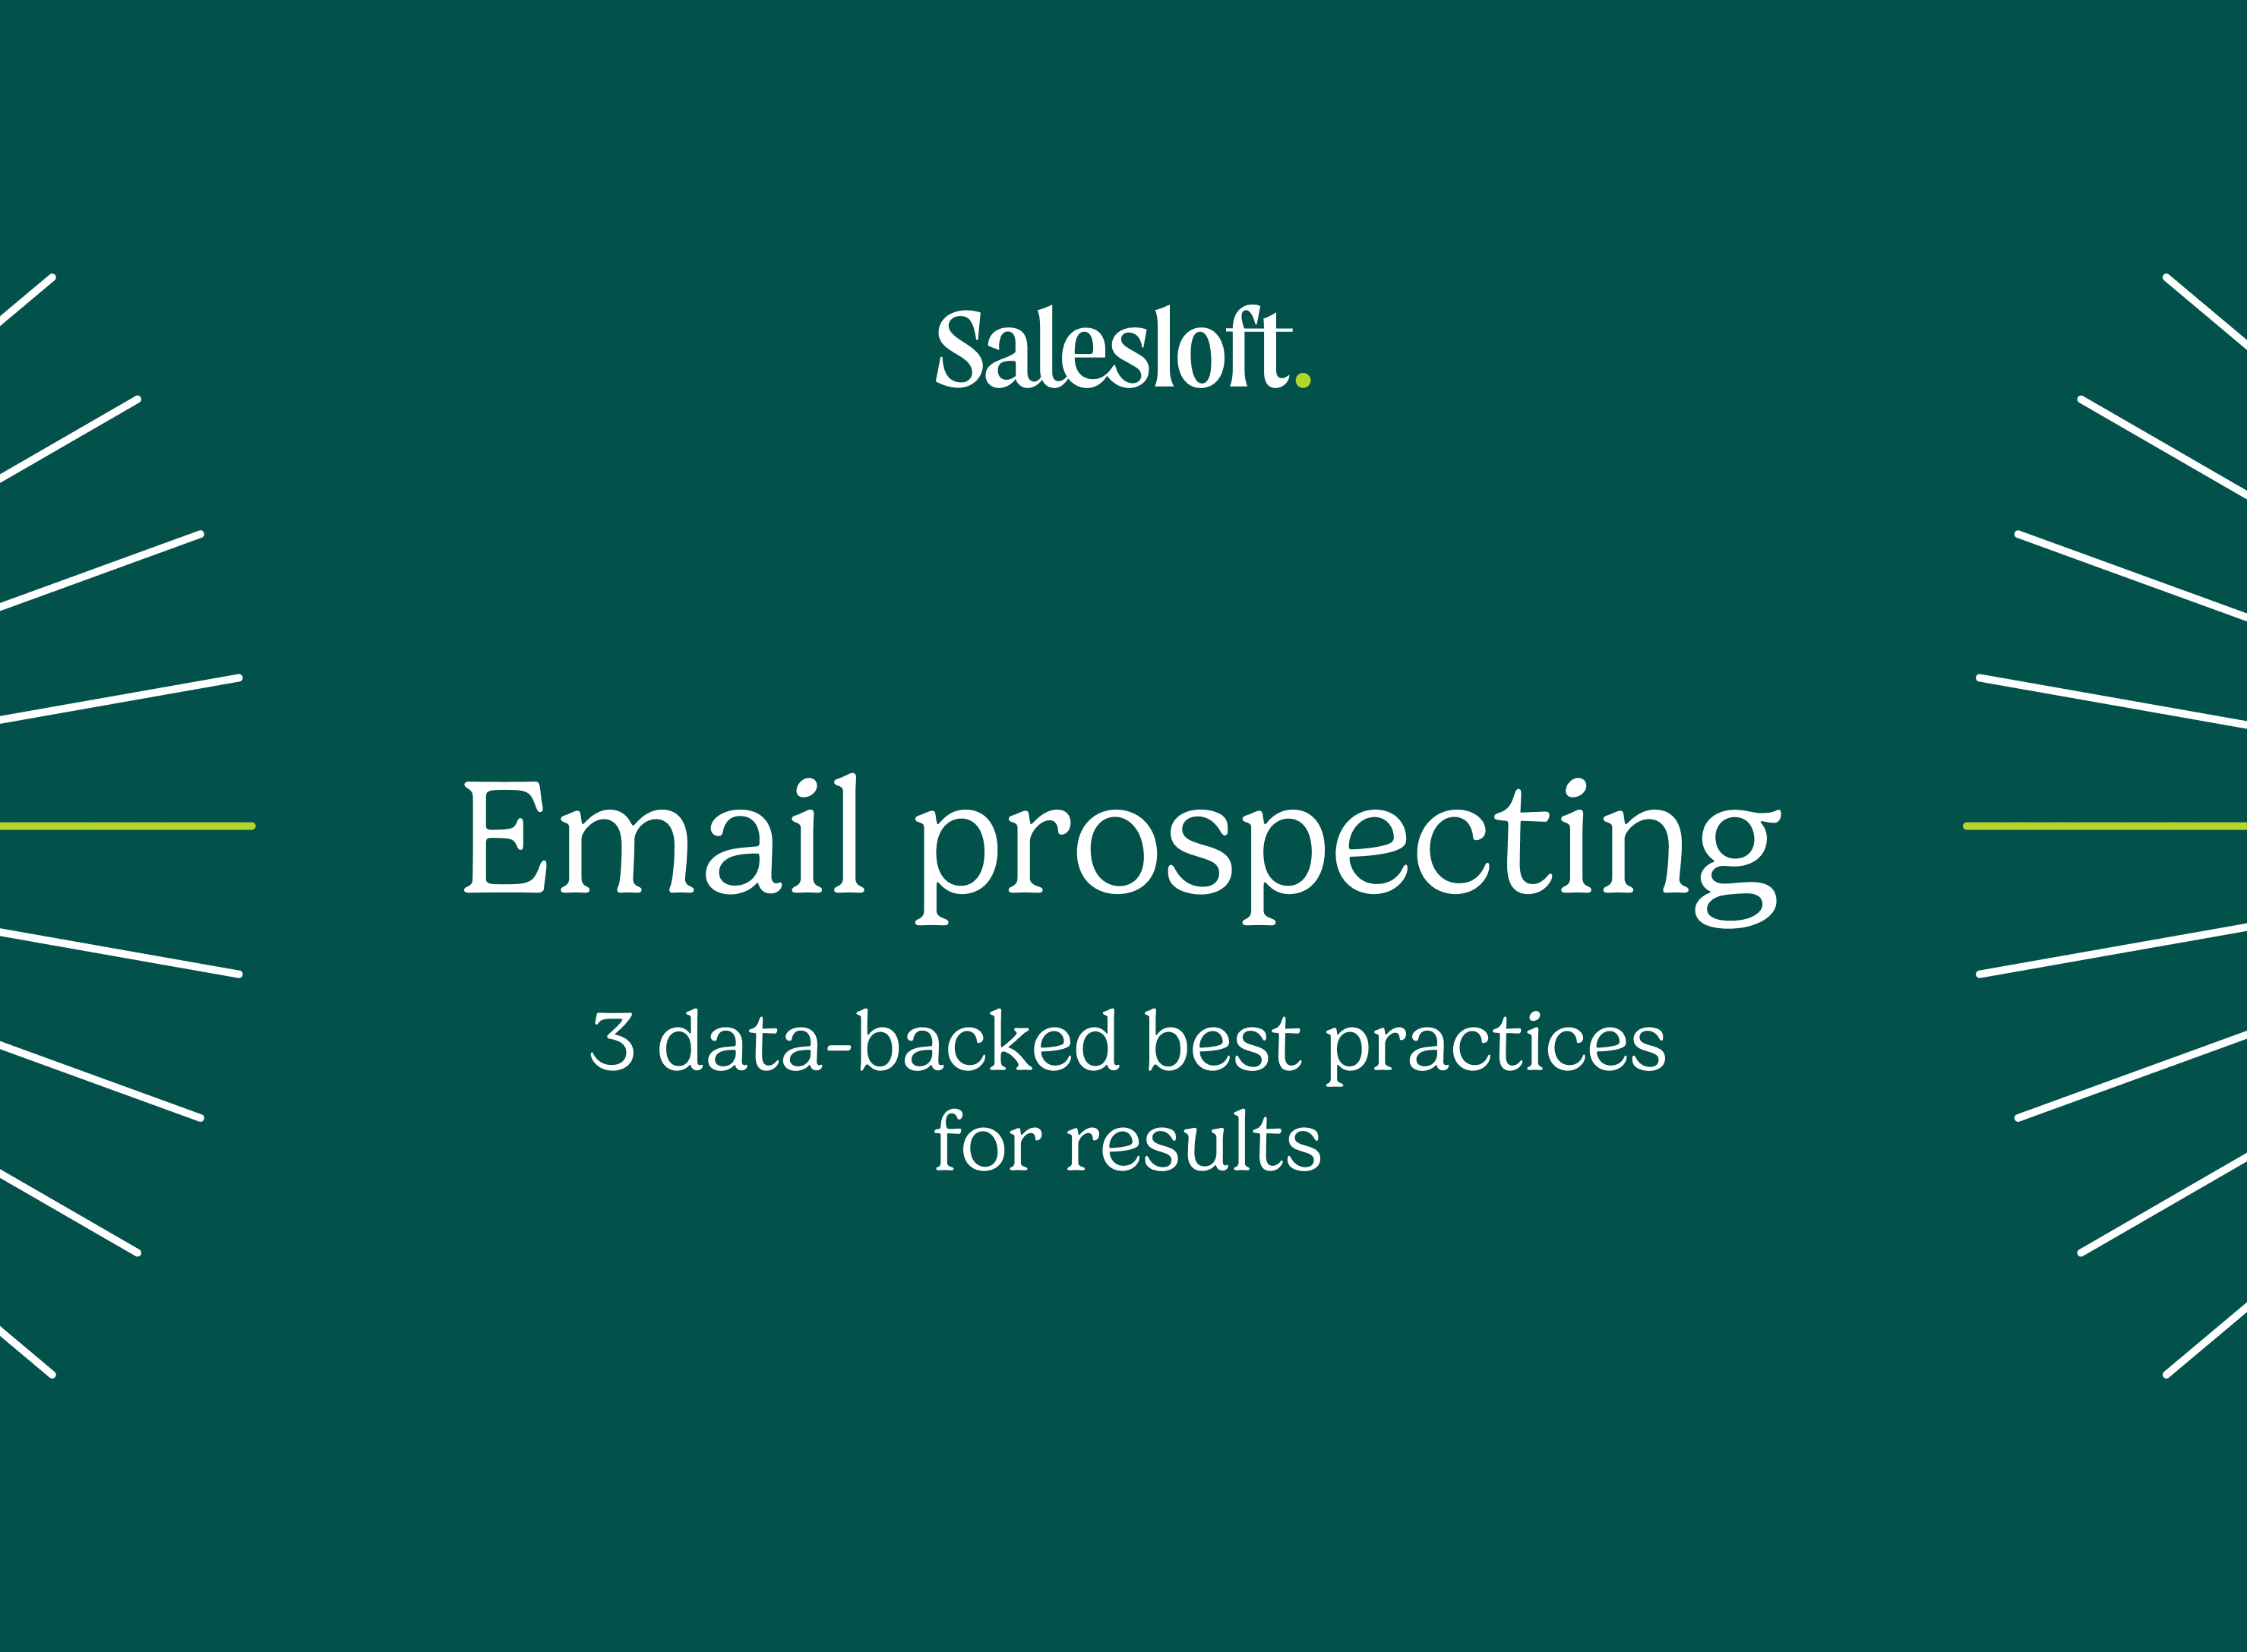 "Email prospecting"